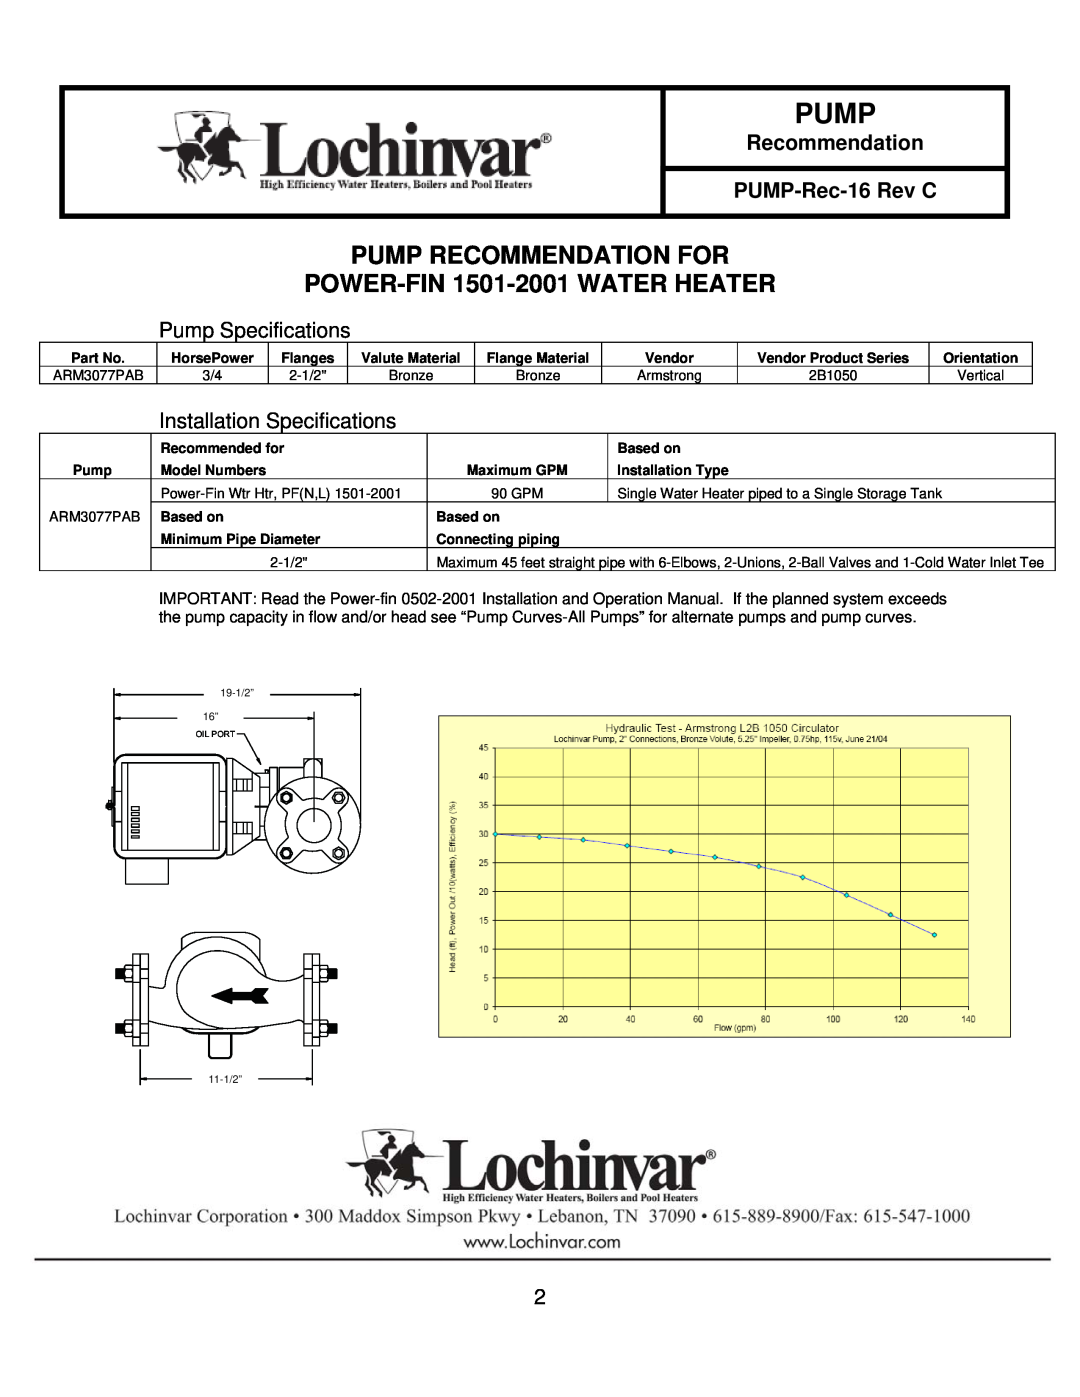 Lochinvar 0502-1302 POWER-FIN 1501-2001WATER HEATER, HorsePower, Recommended for, Pump Recommendation For, Based on 